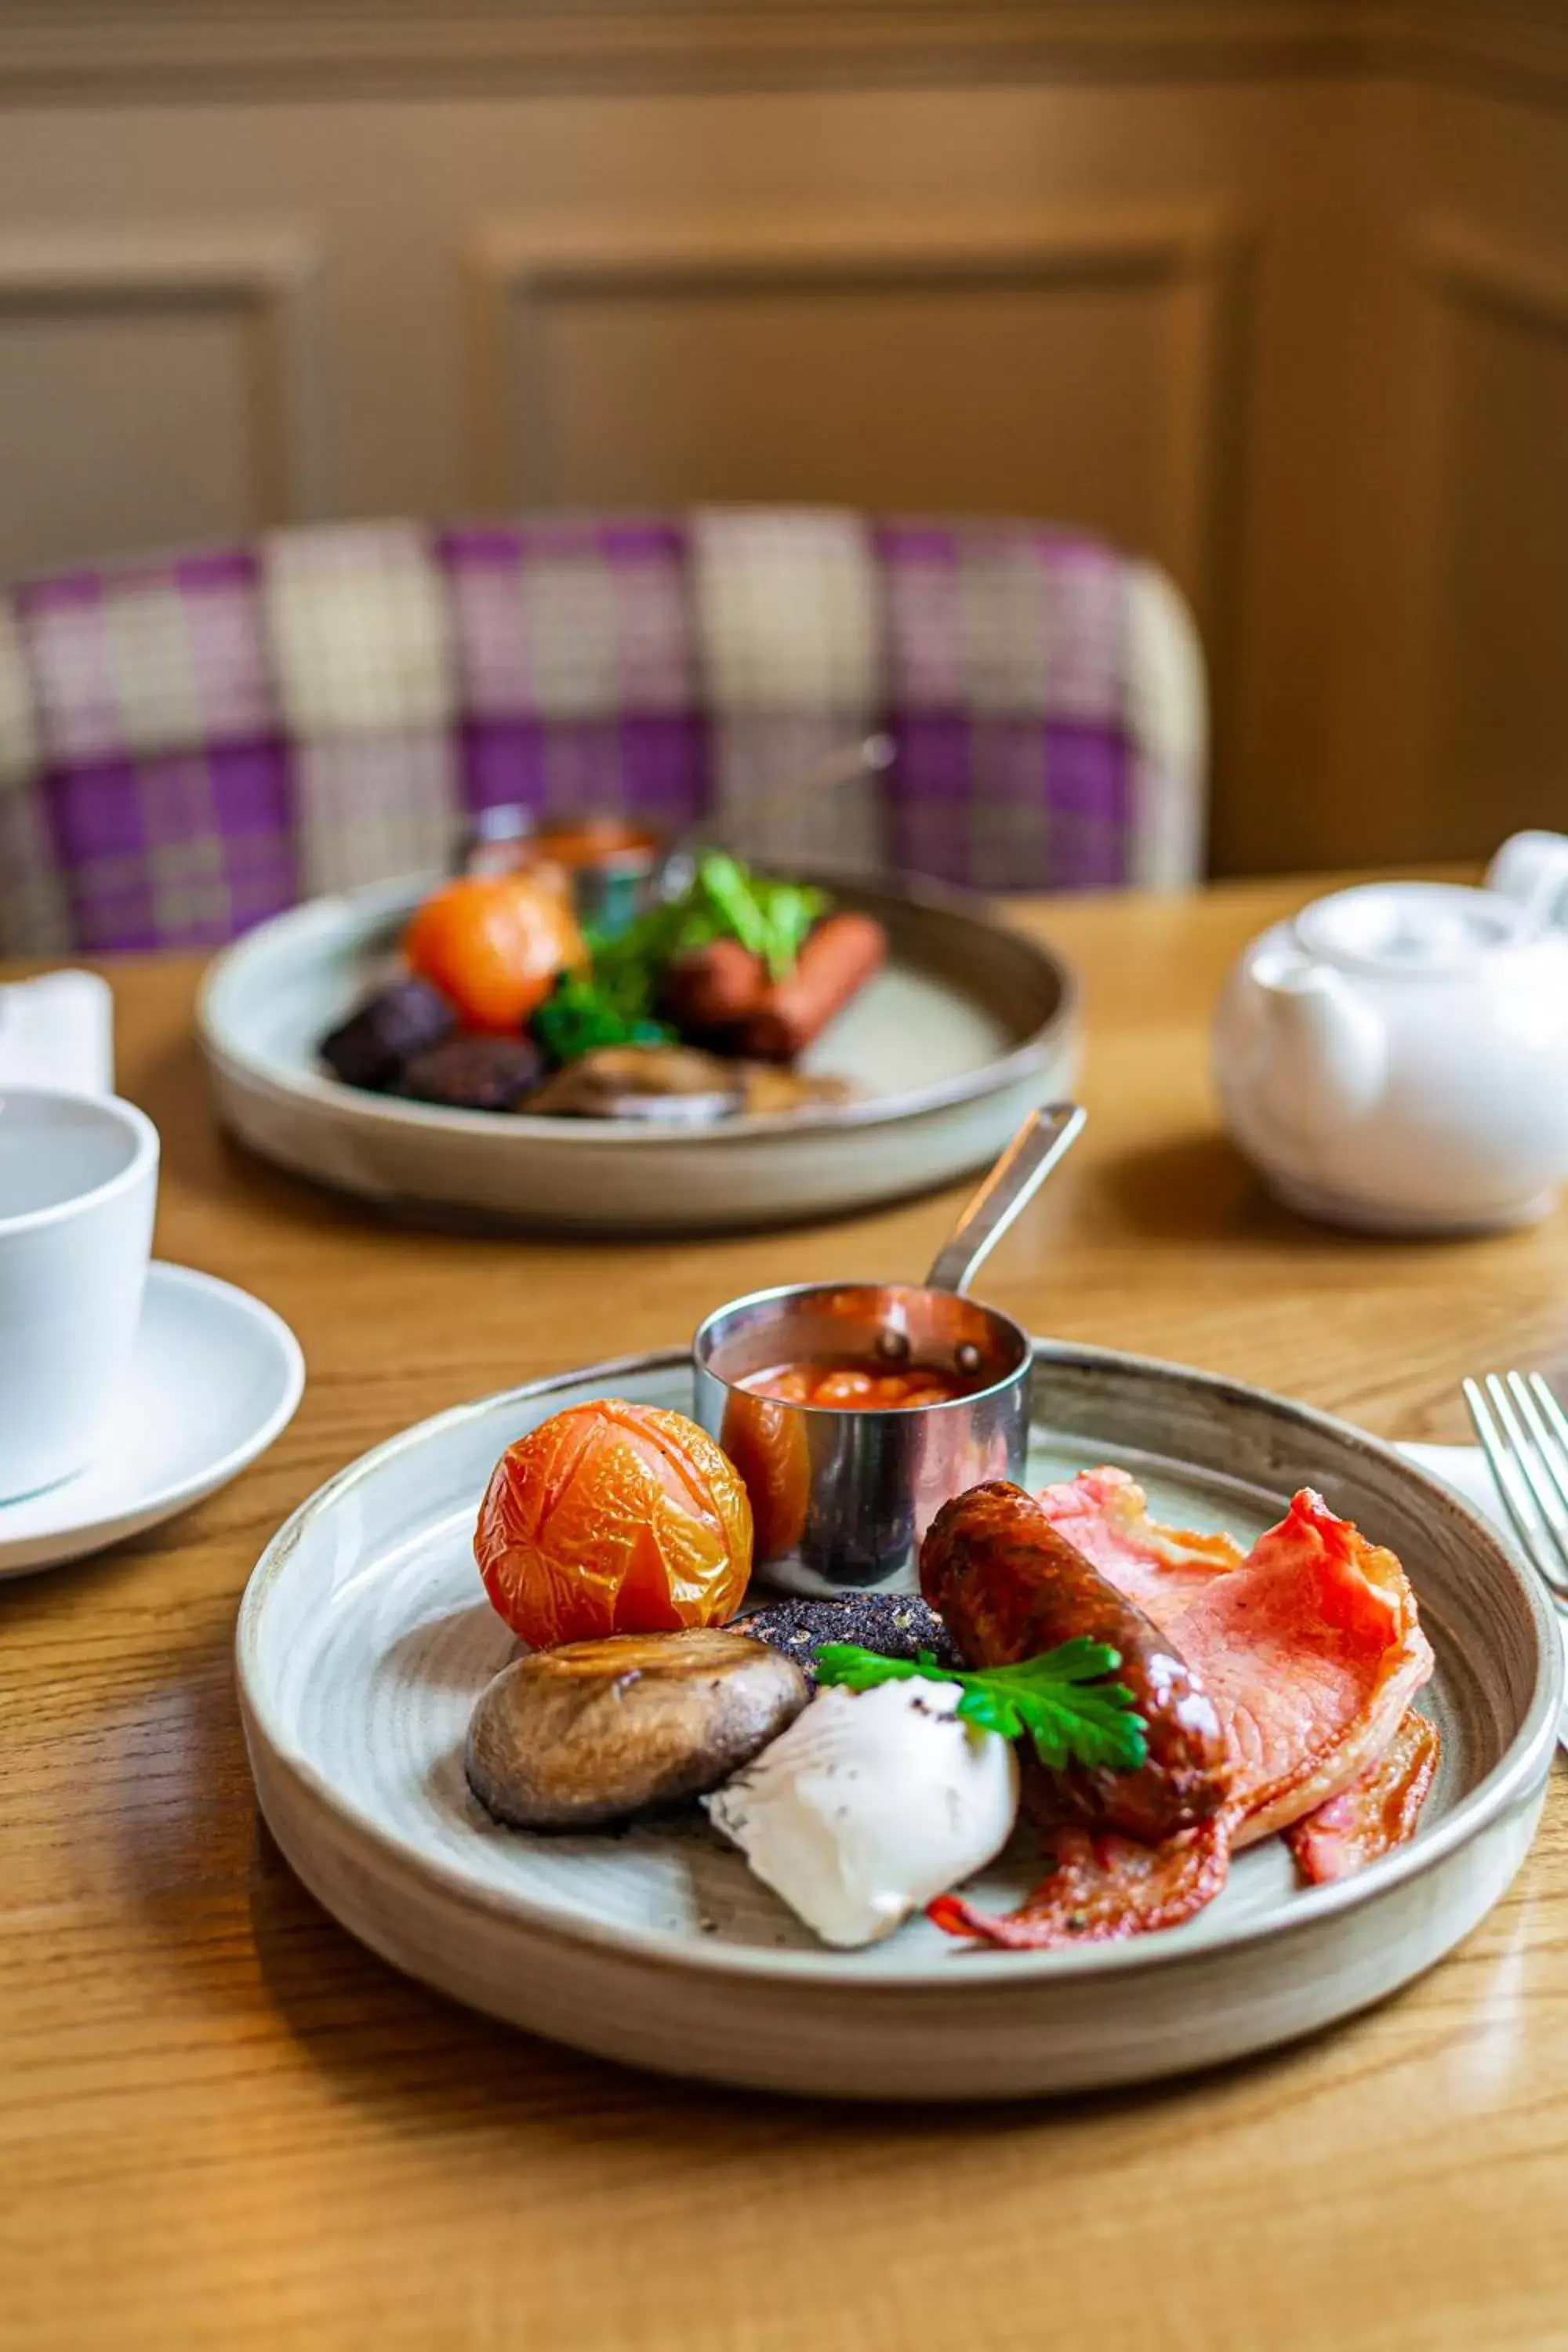 Breakfast in The Rutland Arms Hotel, Bakewell, Derbyshire